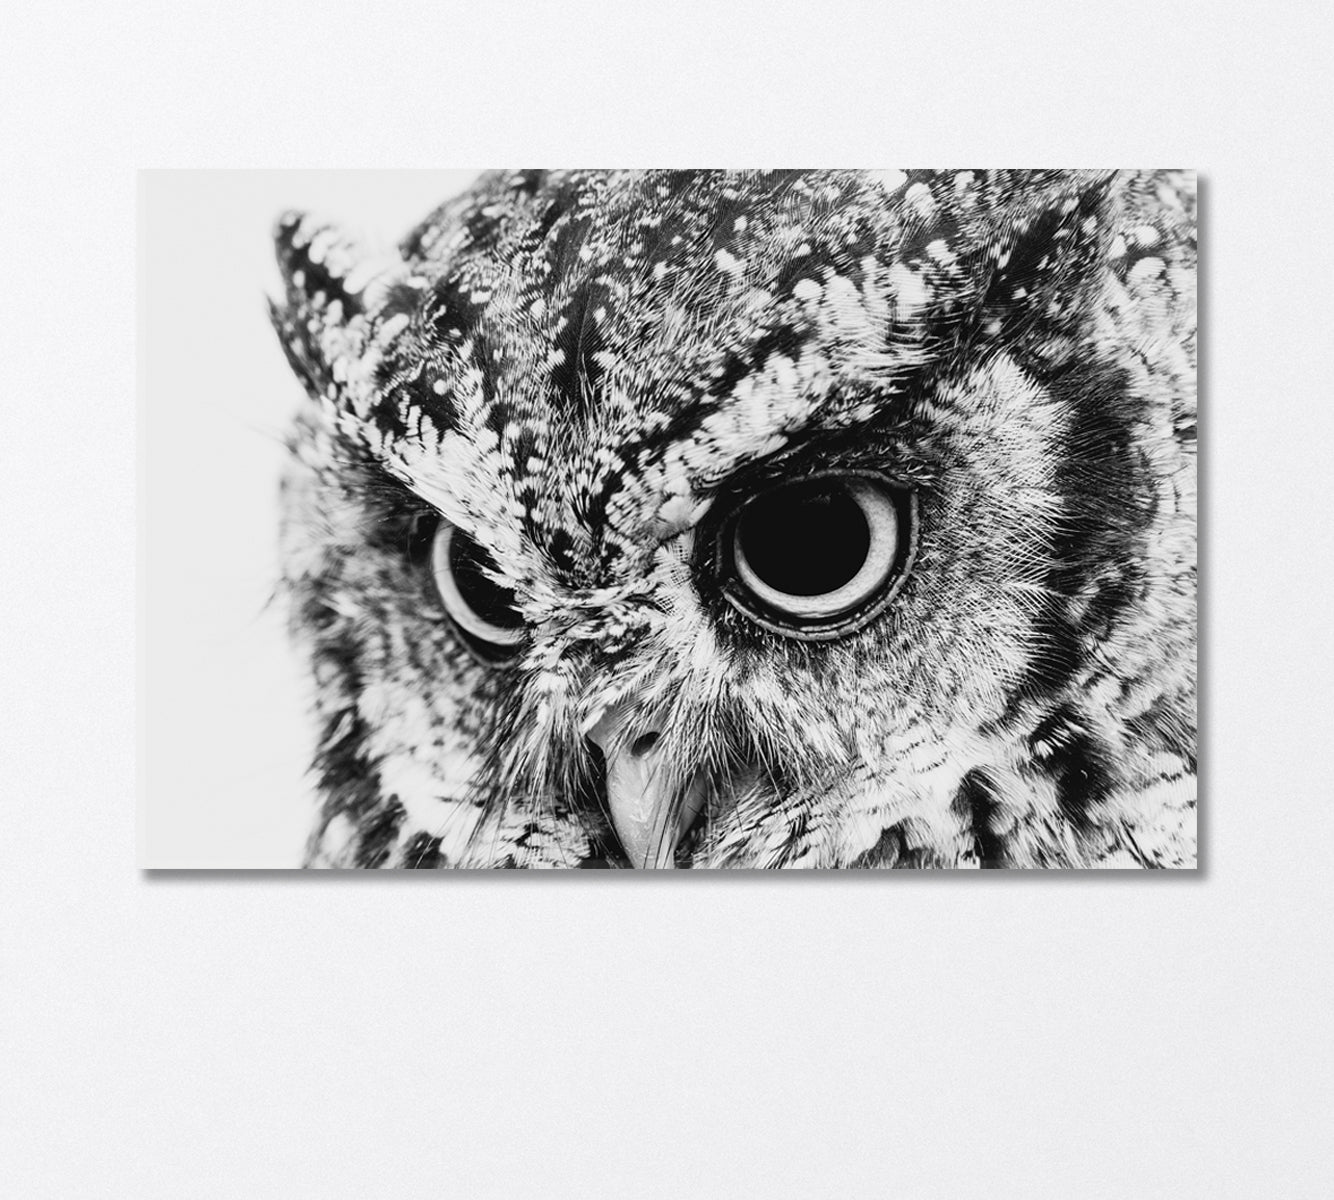 Wild Owl in Black and White Canvas Print-Canvas Print-CetArt-1 Panel-24x16 inches-CetArt